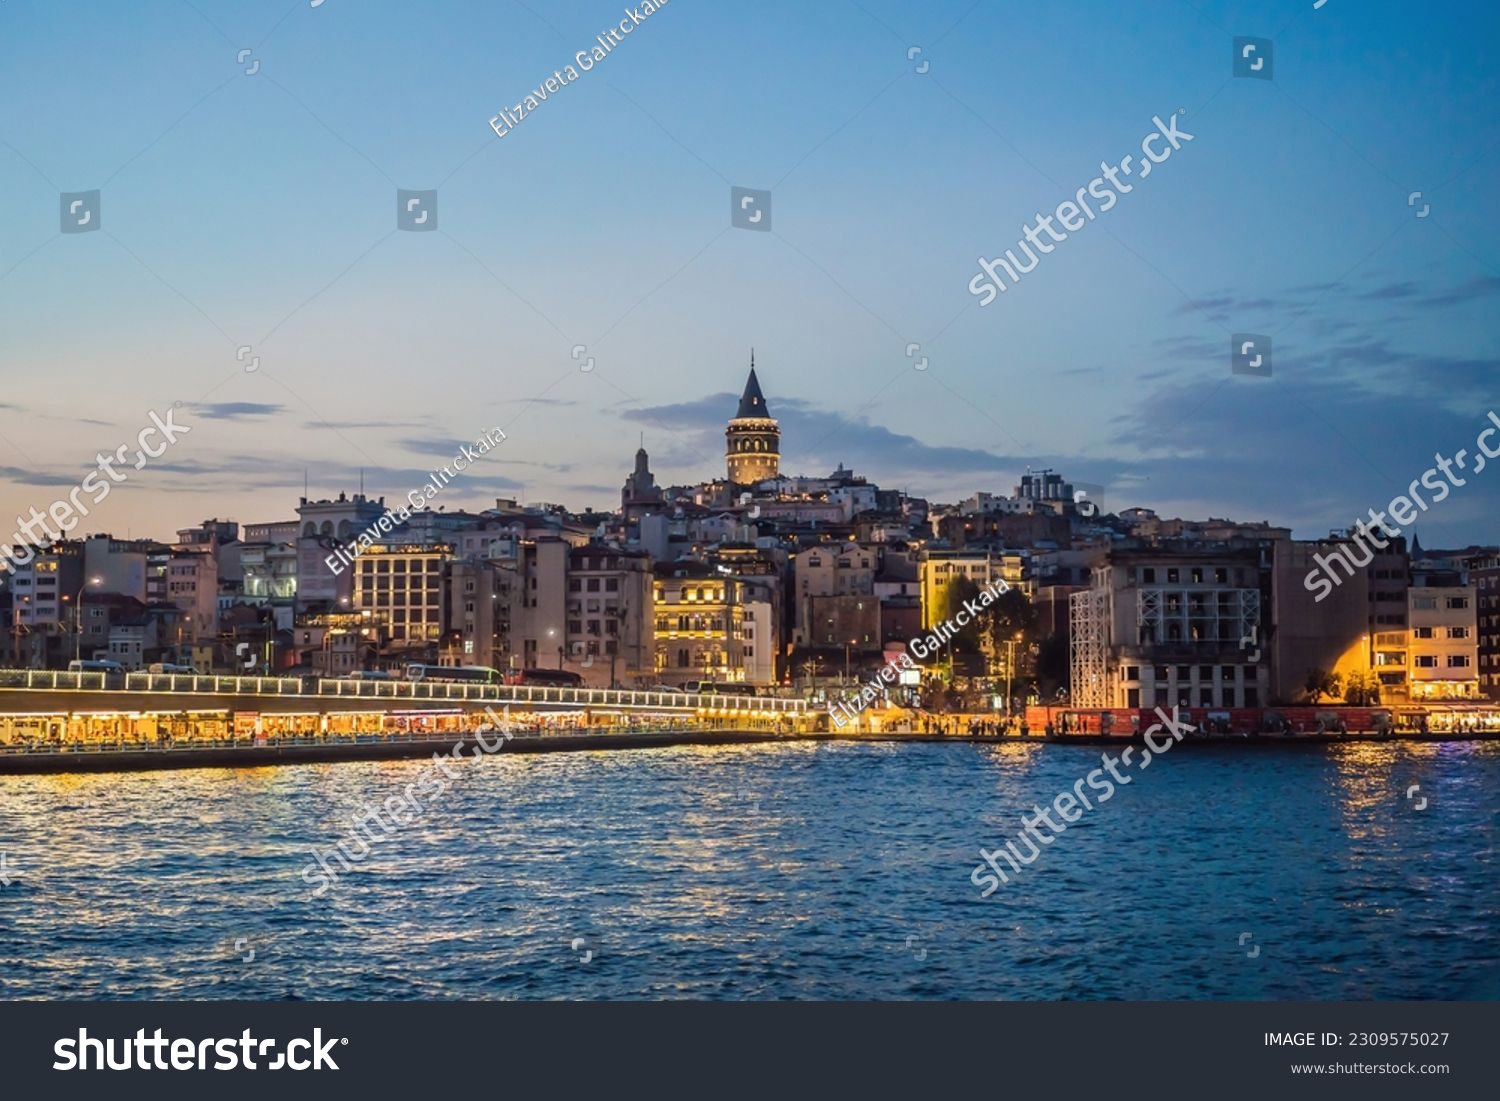 Istanbul city skyline in Turkey, Beyoglu district old houses with Galata tower on top, view from the Golden Horn #2309575027